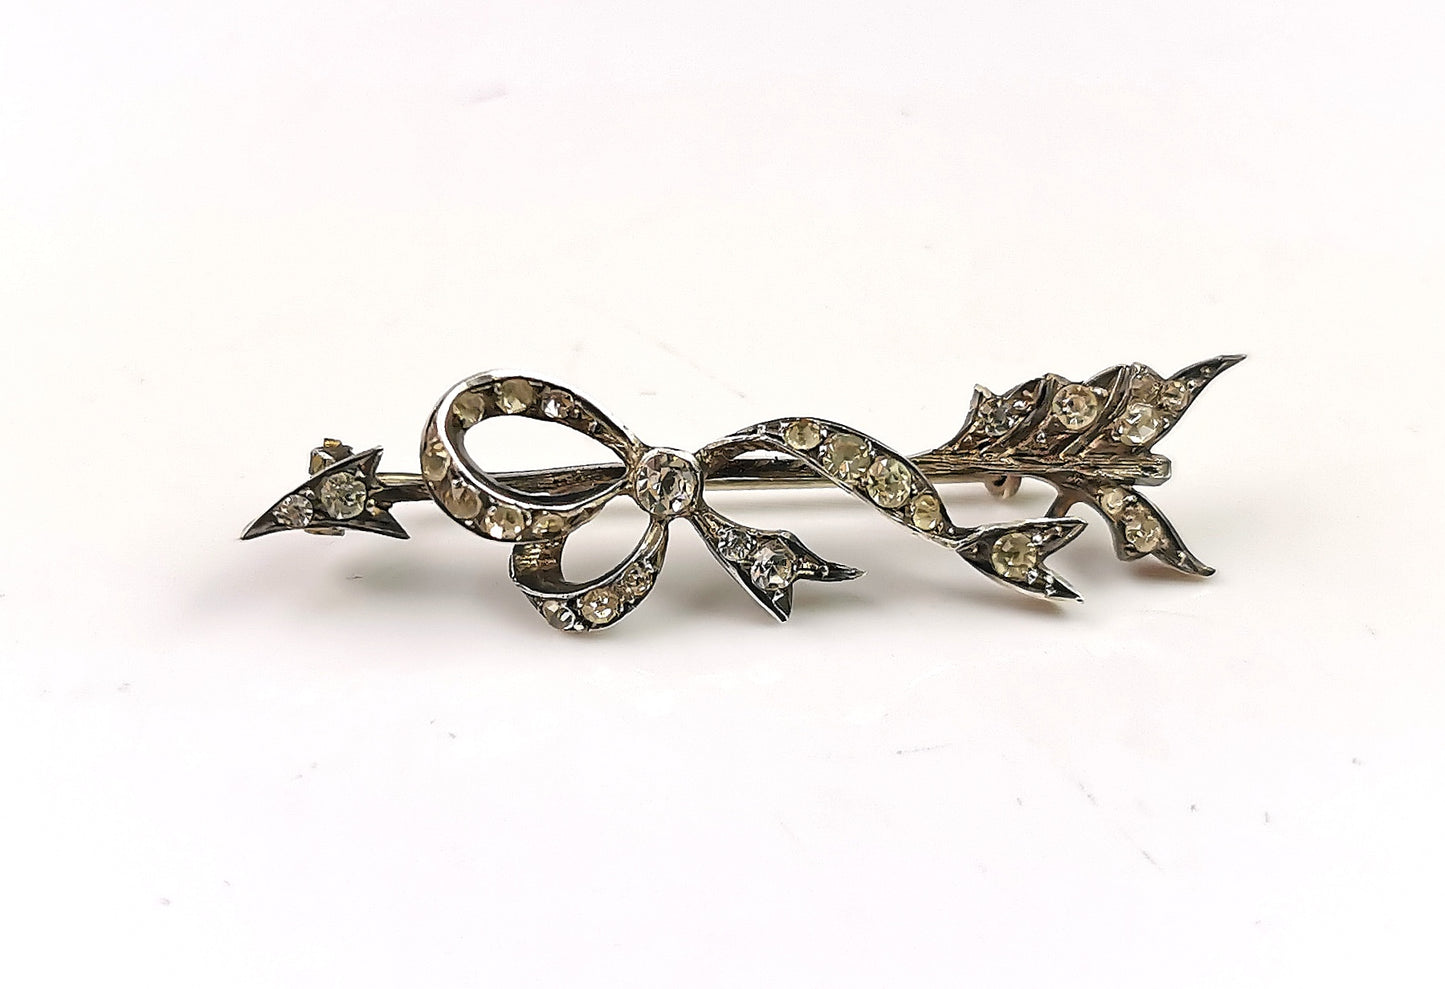 Antique paste Arrow and Ribbon bow brooch, sterling silver, Art Deco